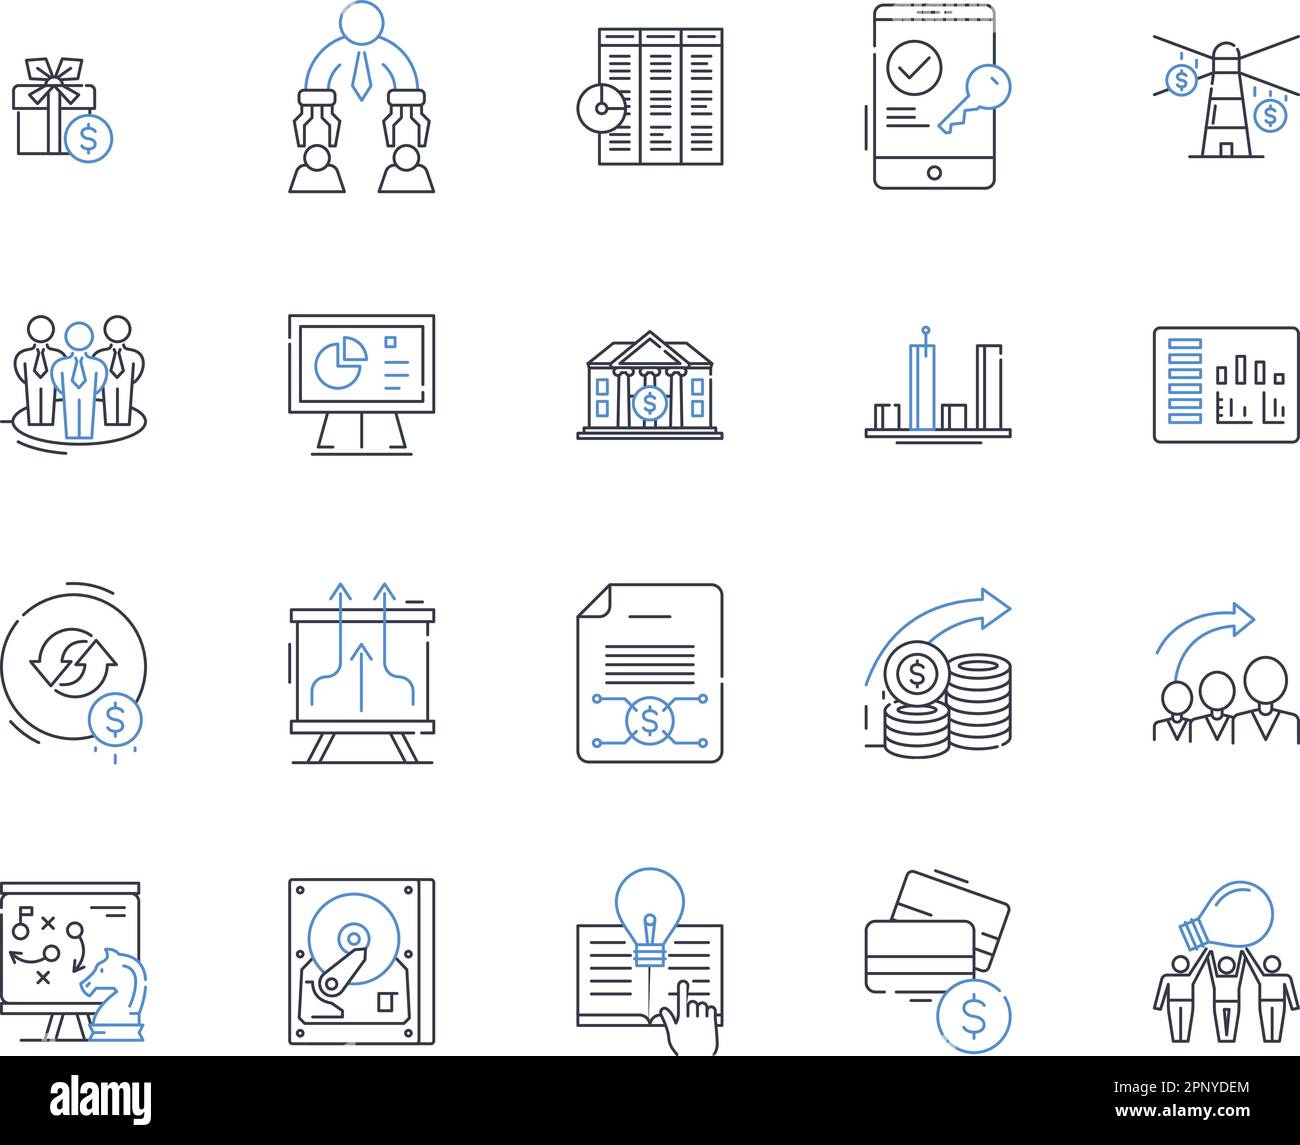 Quality assurance line icons collection. Testing, Standards, Control, Improvement, Compliance, Management, Audit vector and linear illustration Stock Vector